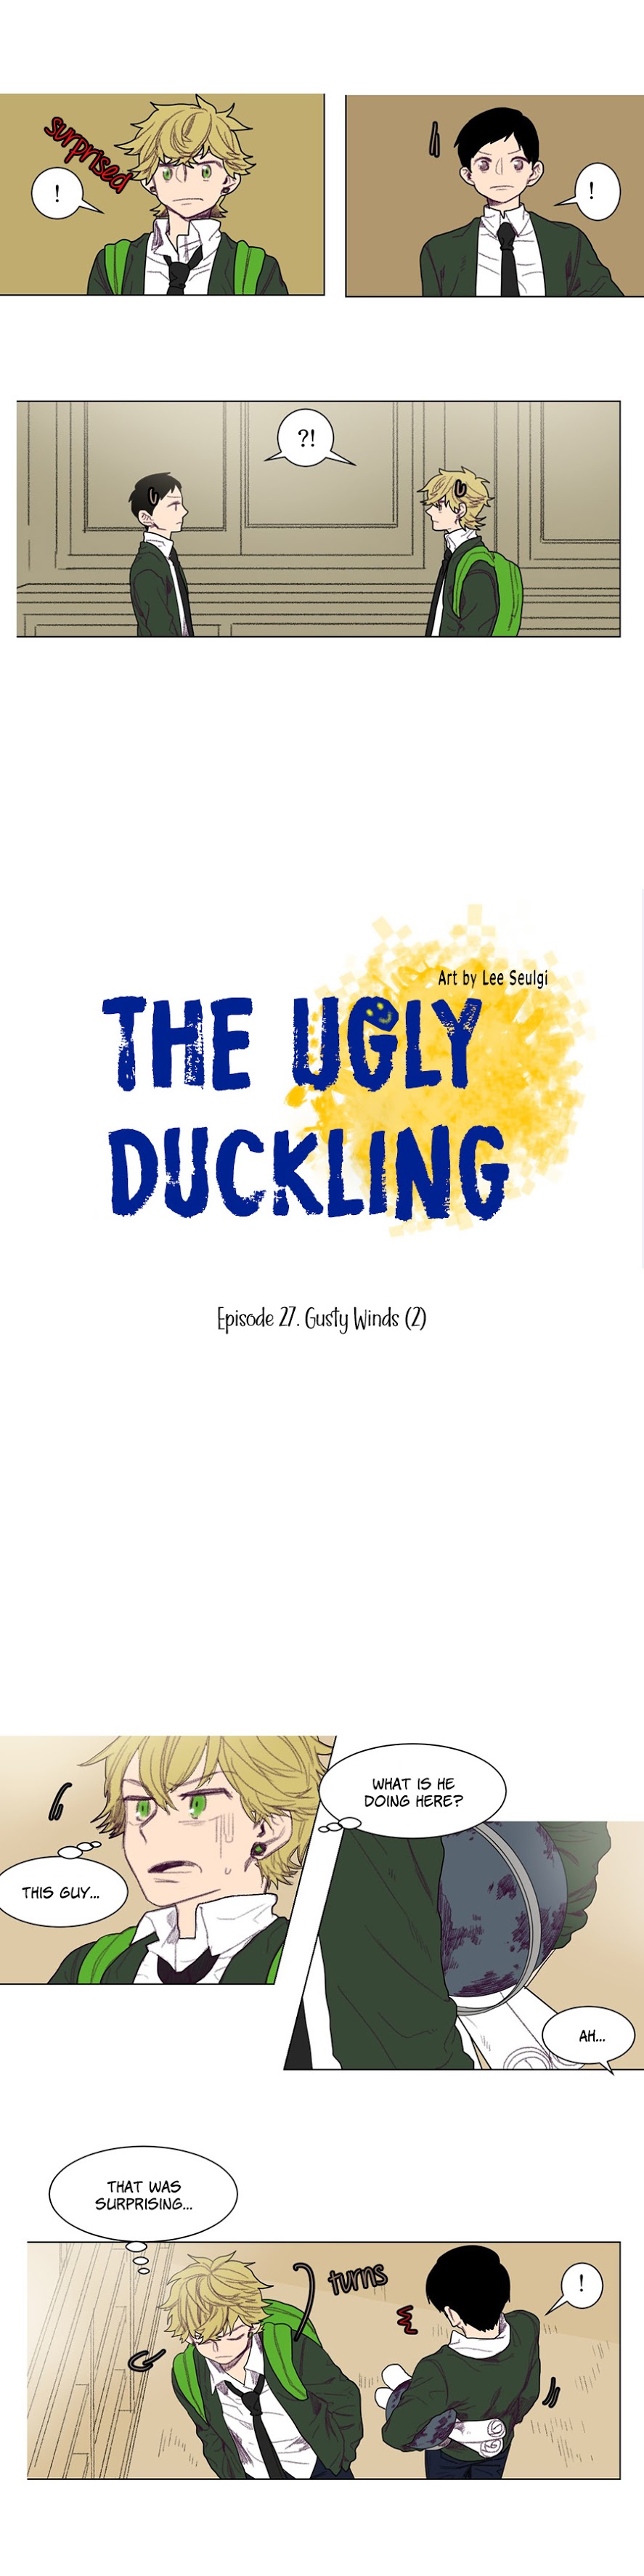 ugly_duckling_27_2